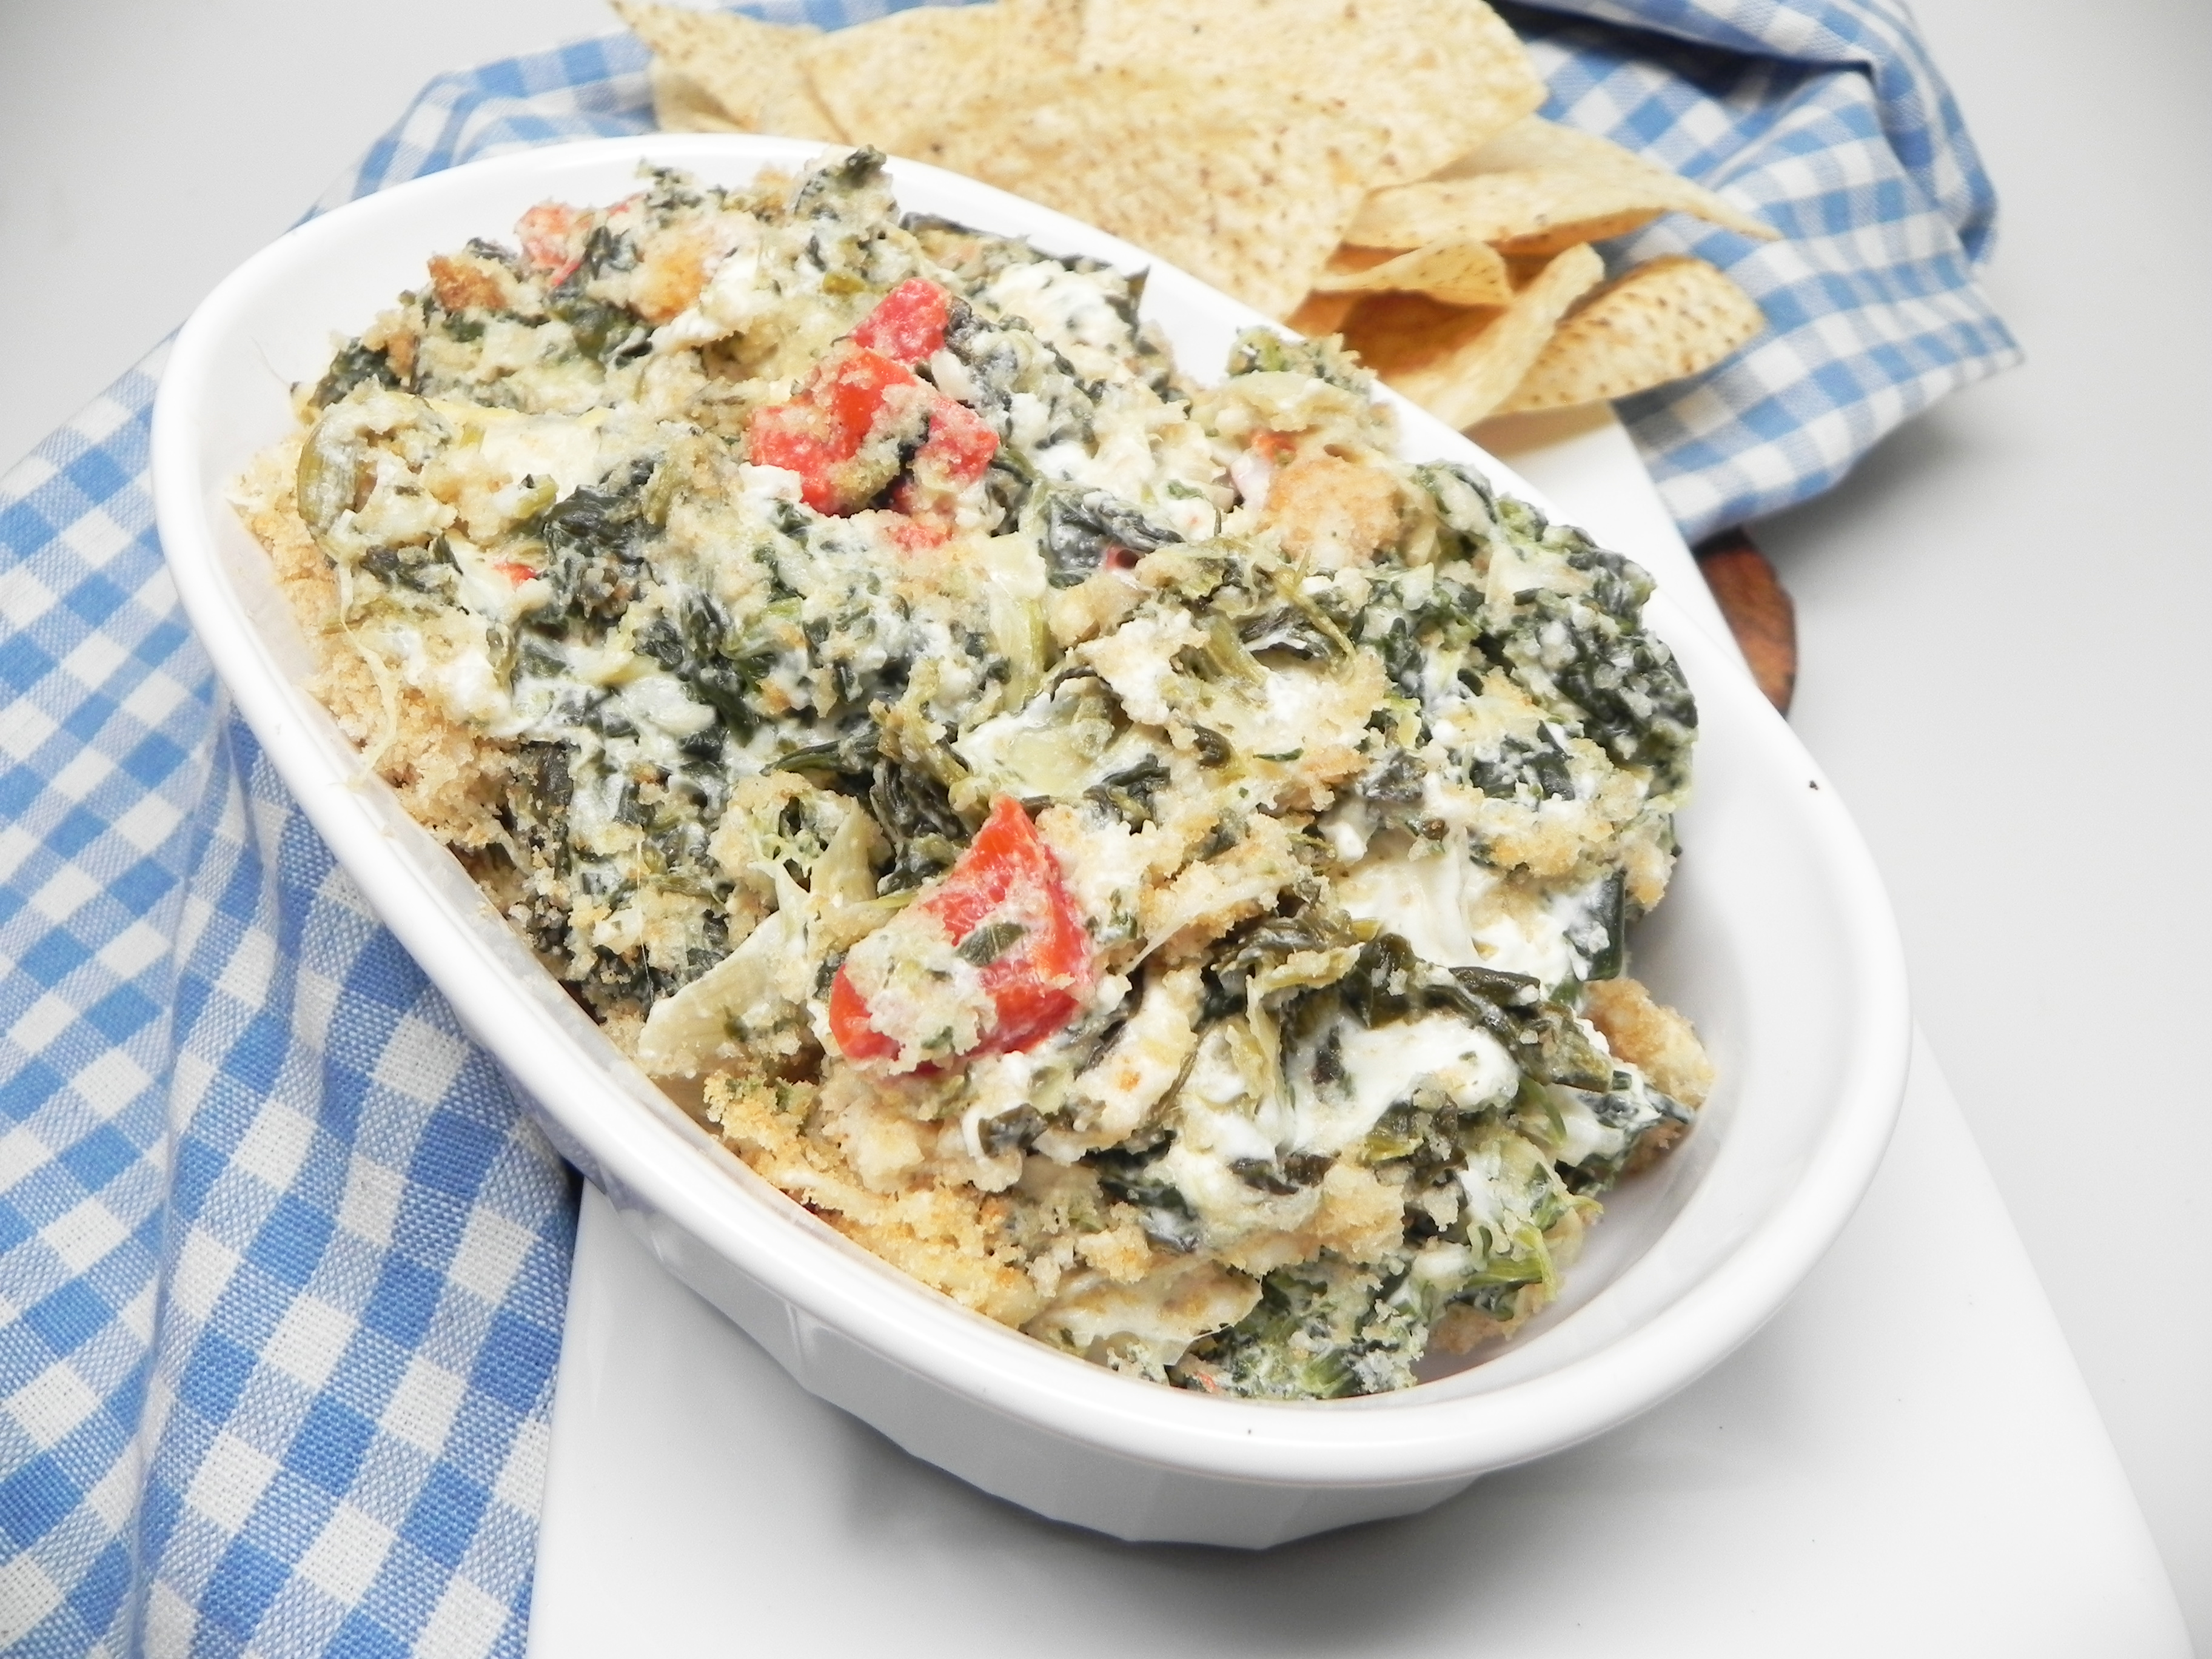 Skinny Spinach and Artichoke Dip image